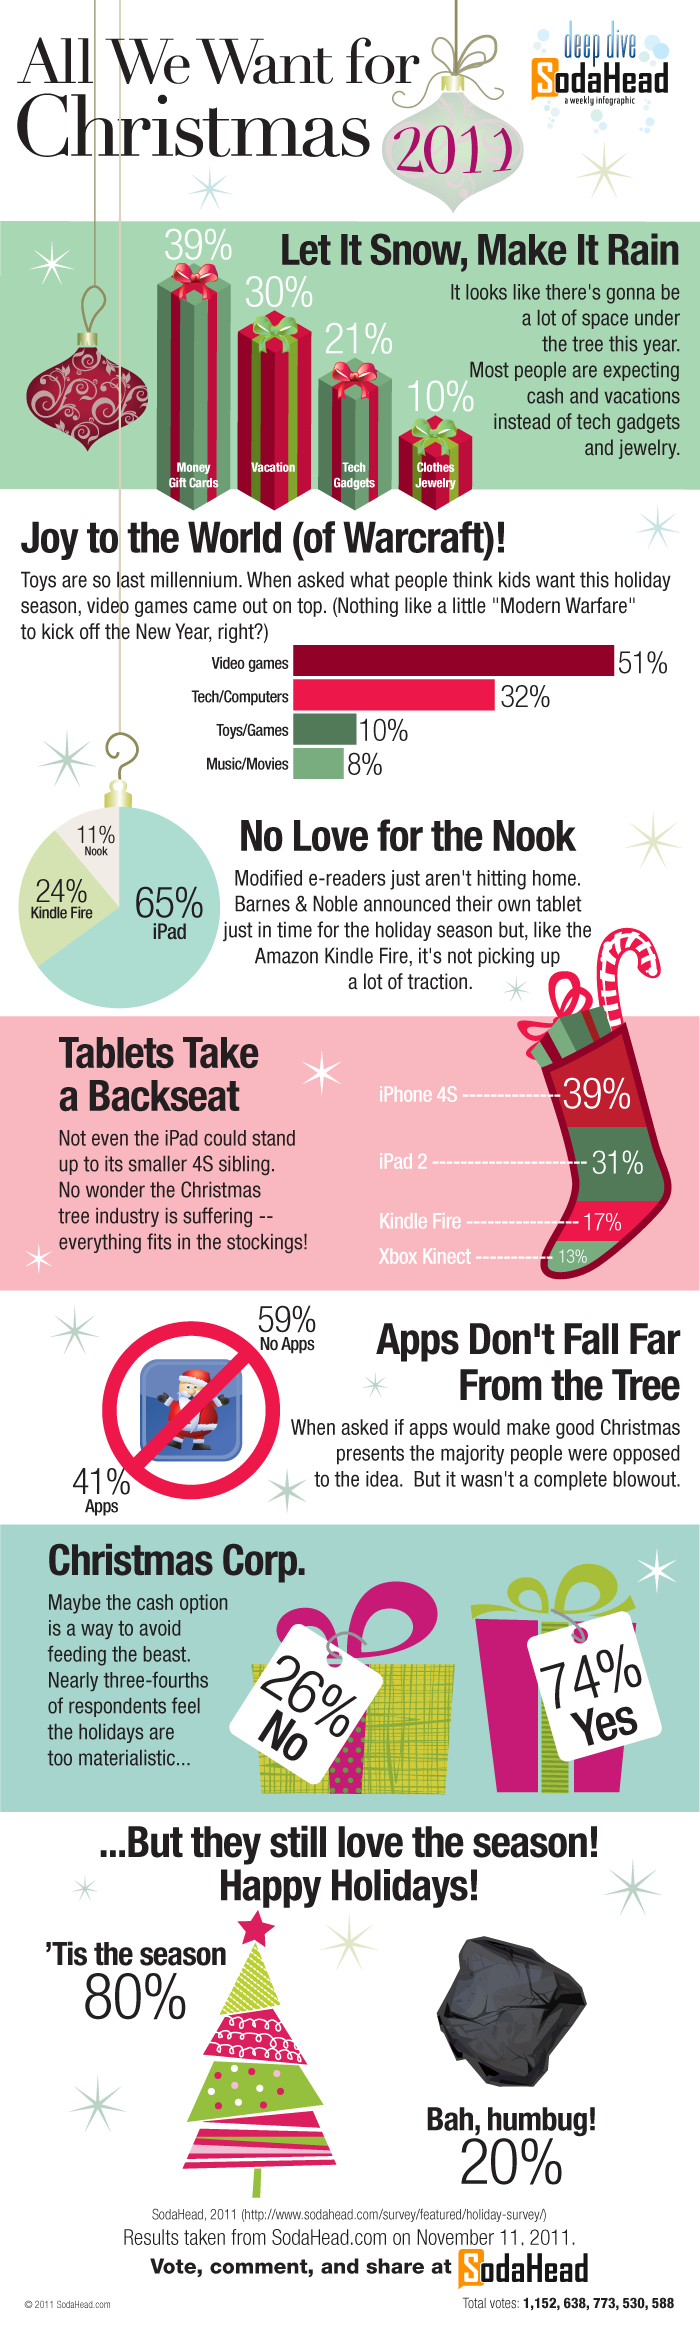 Infographic: All We Want for Christmas 2011 - 123Print Blog